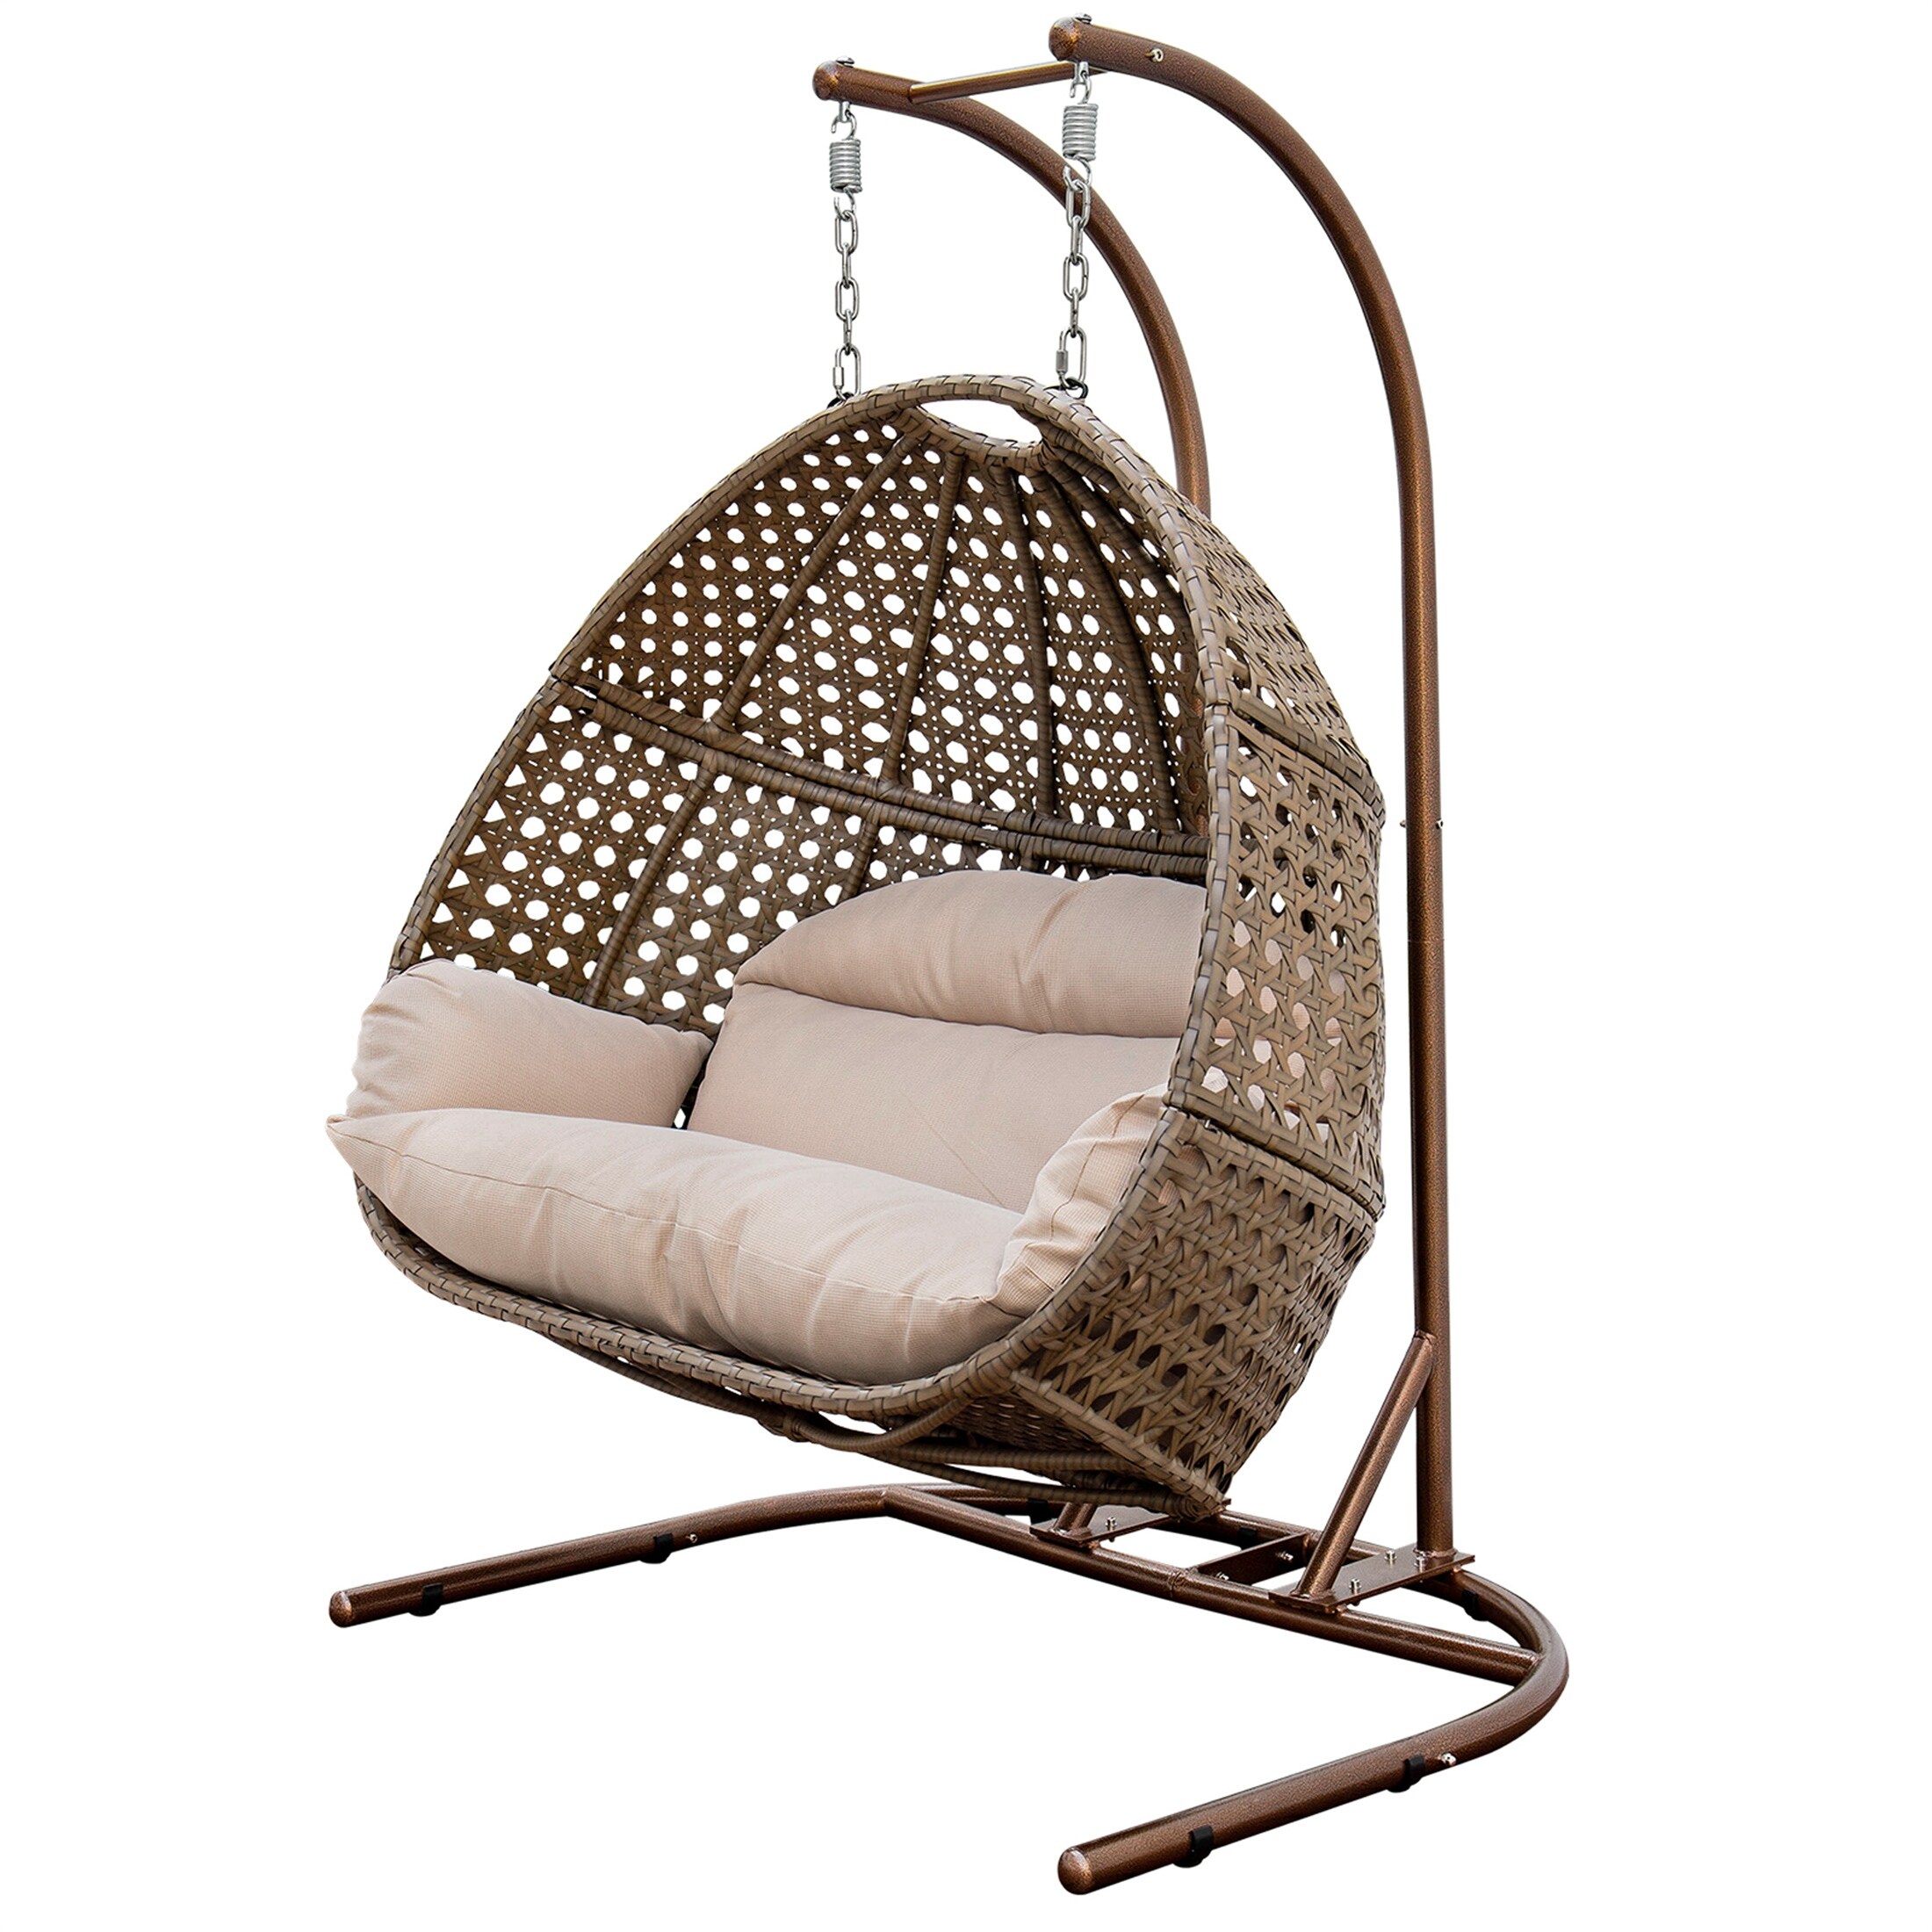 Double Seat Swing Chair with Stand and Cushion - Bed Bath & Beyond -  38933674